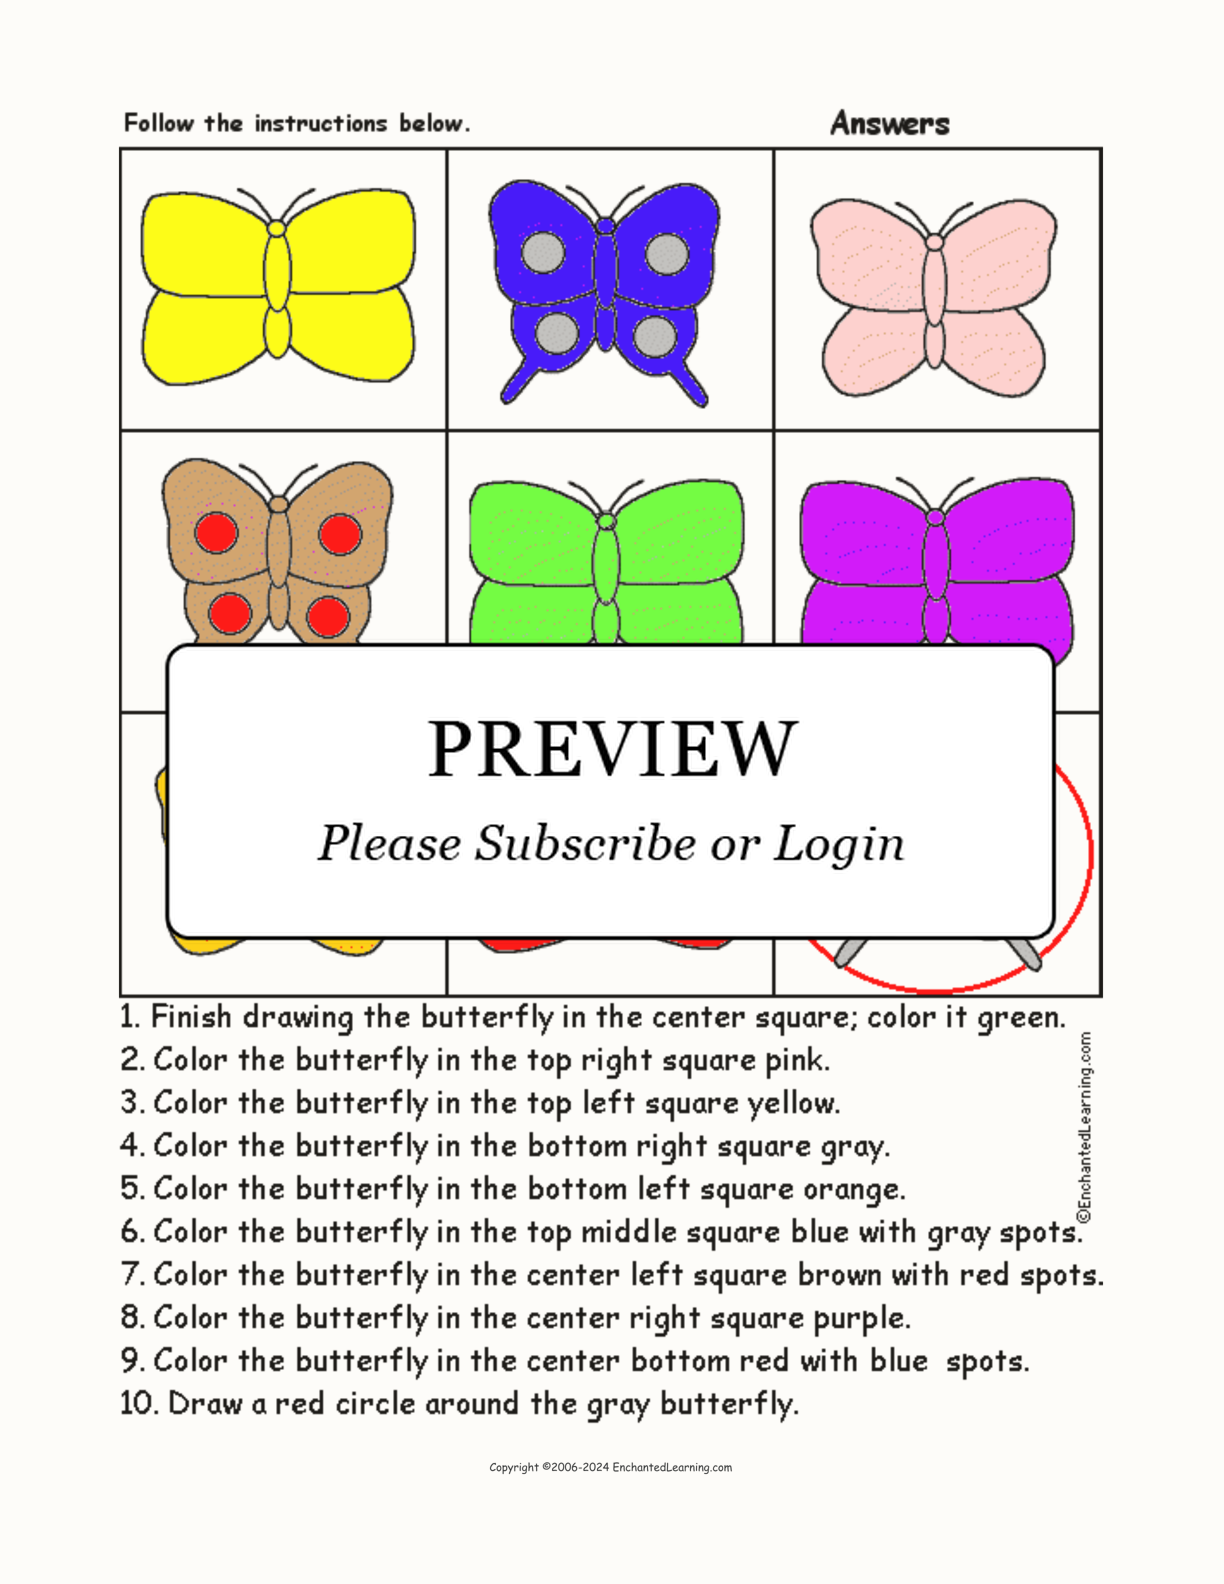 Butterflies - Follow the Instructions interactive worksheet page 2